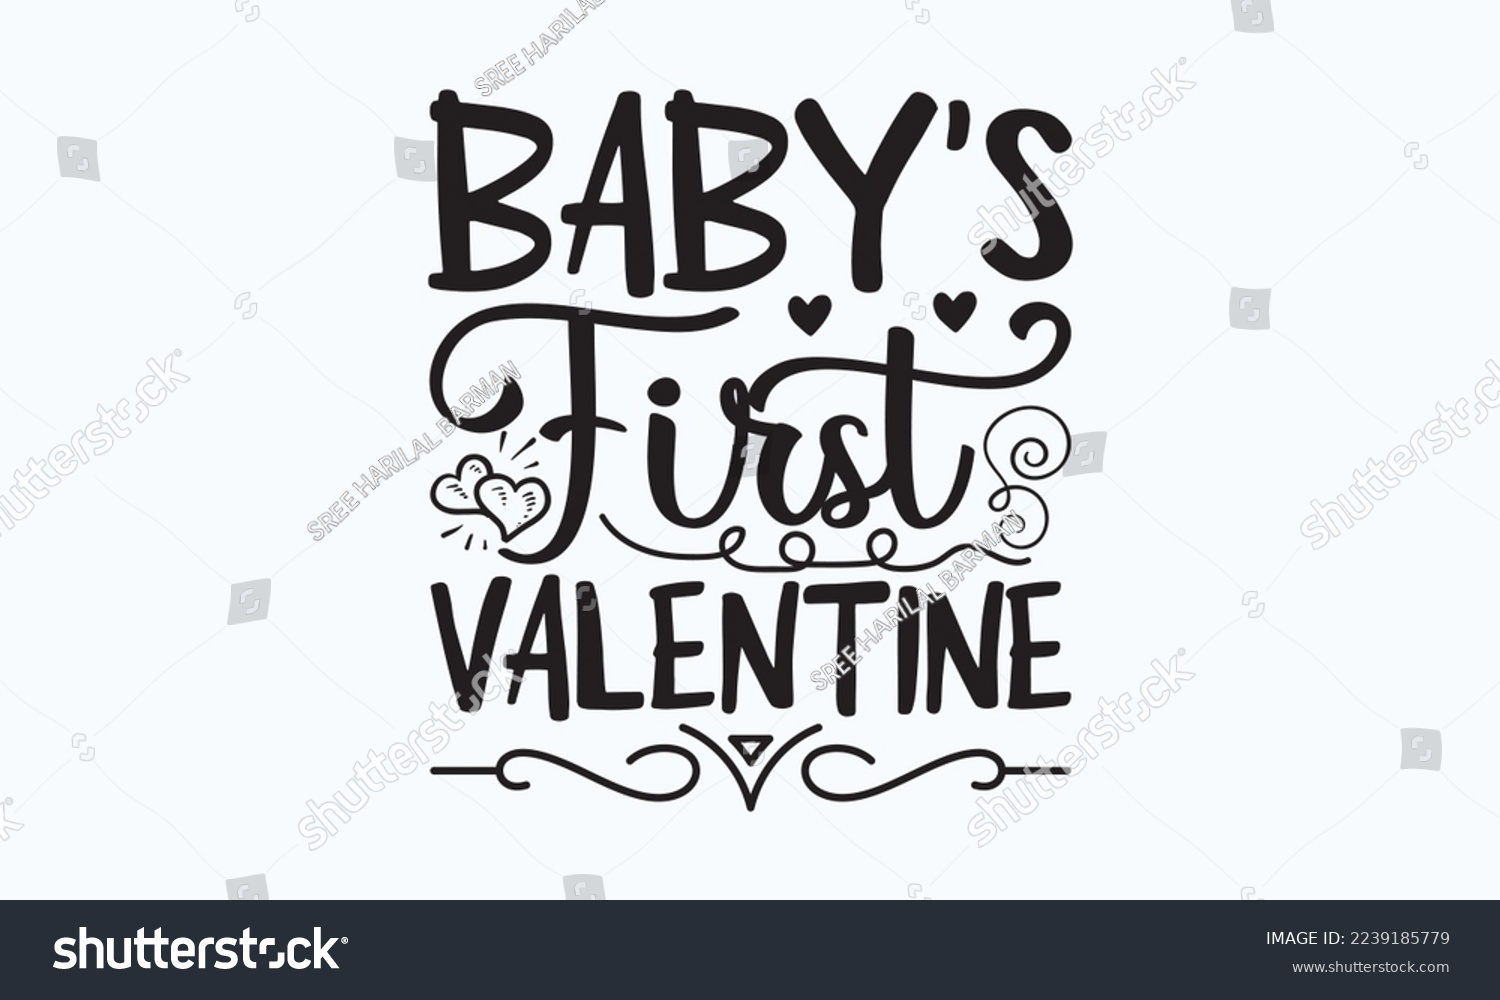 SVG of Baby’s first valentine - President's day T-shirt Design, File Sports SVG Design, Sports typography t-shirt design, For stickers, Templet, mugs, etc. for Cutting, cards, and flyers. svg